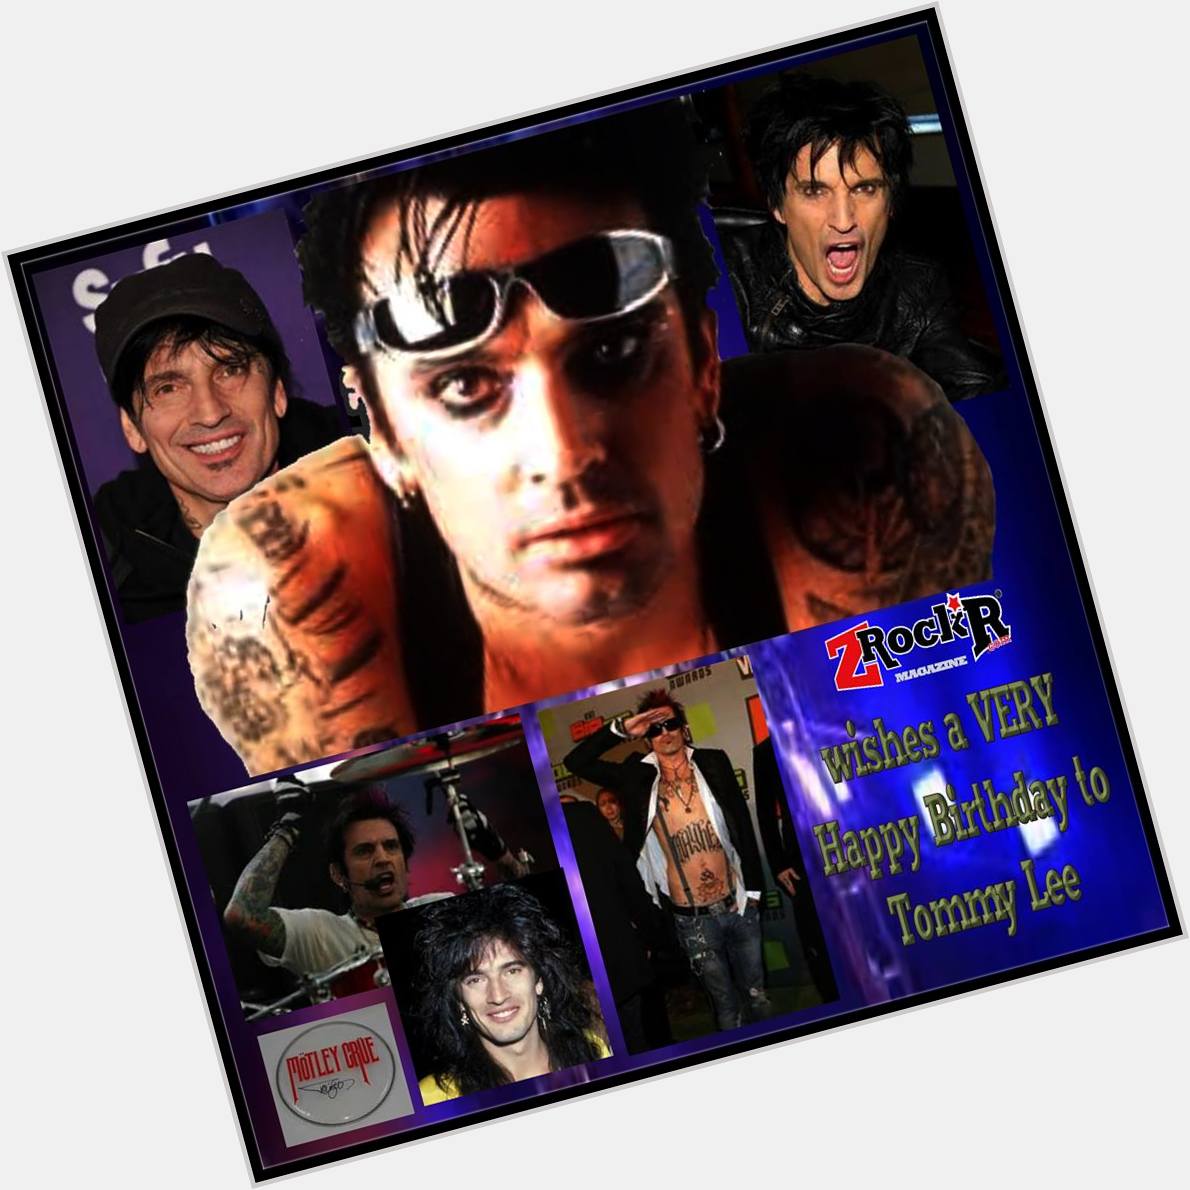 A VERY HAPPY BIRTHDAY Going out to drummer Tommy Lee from all of us at ZRock\R! 